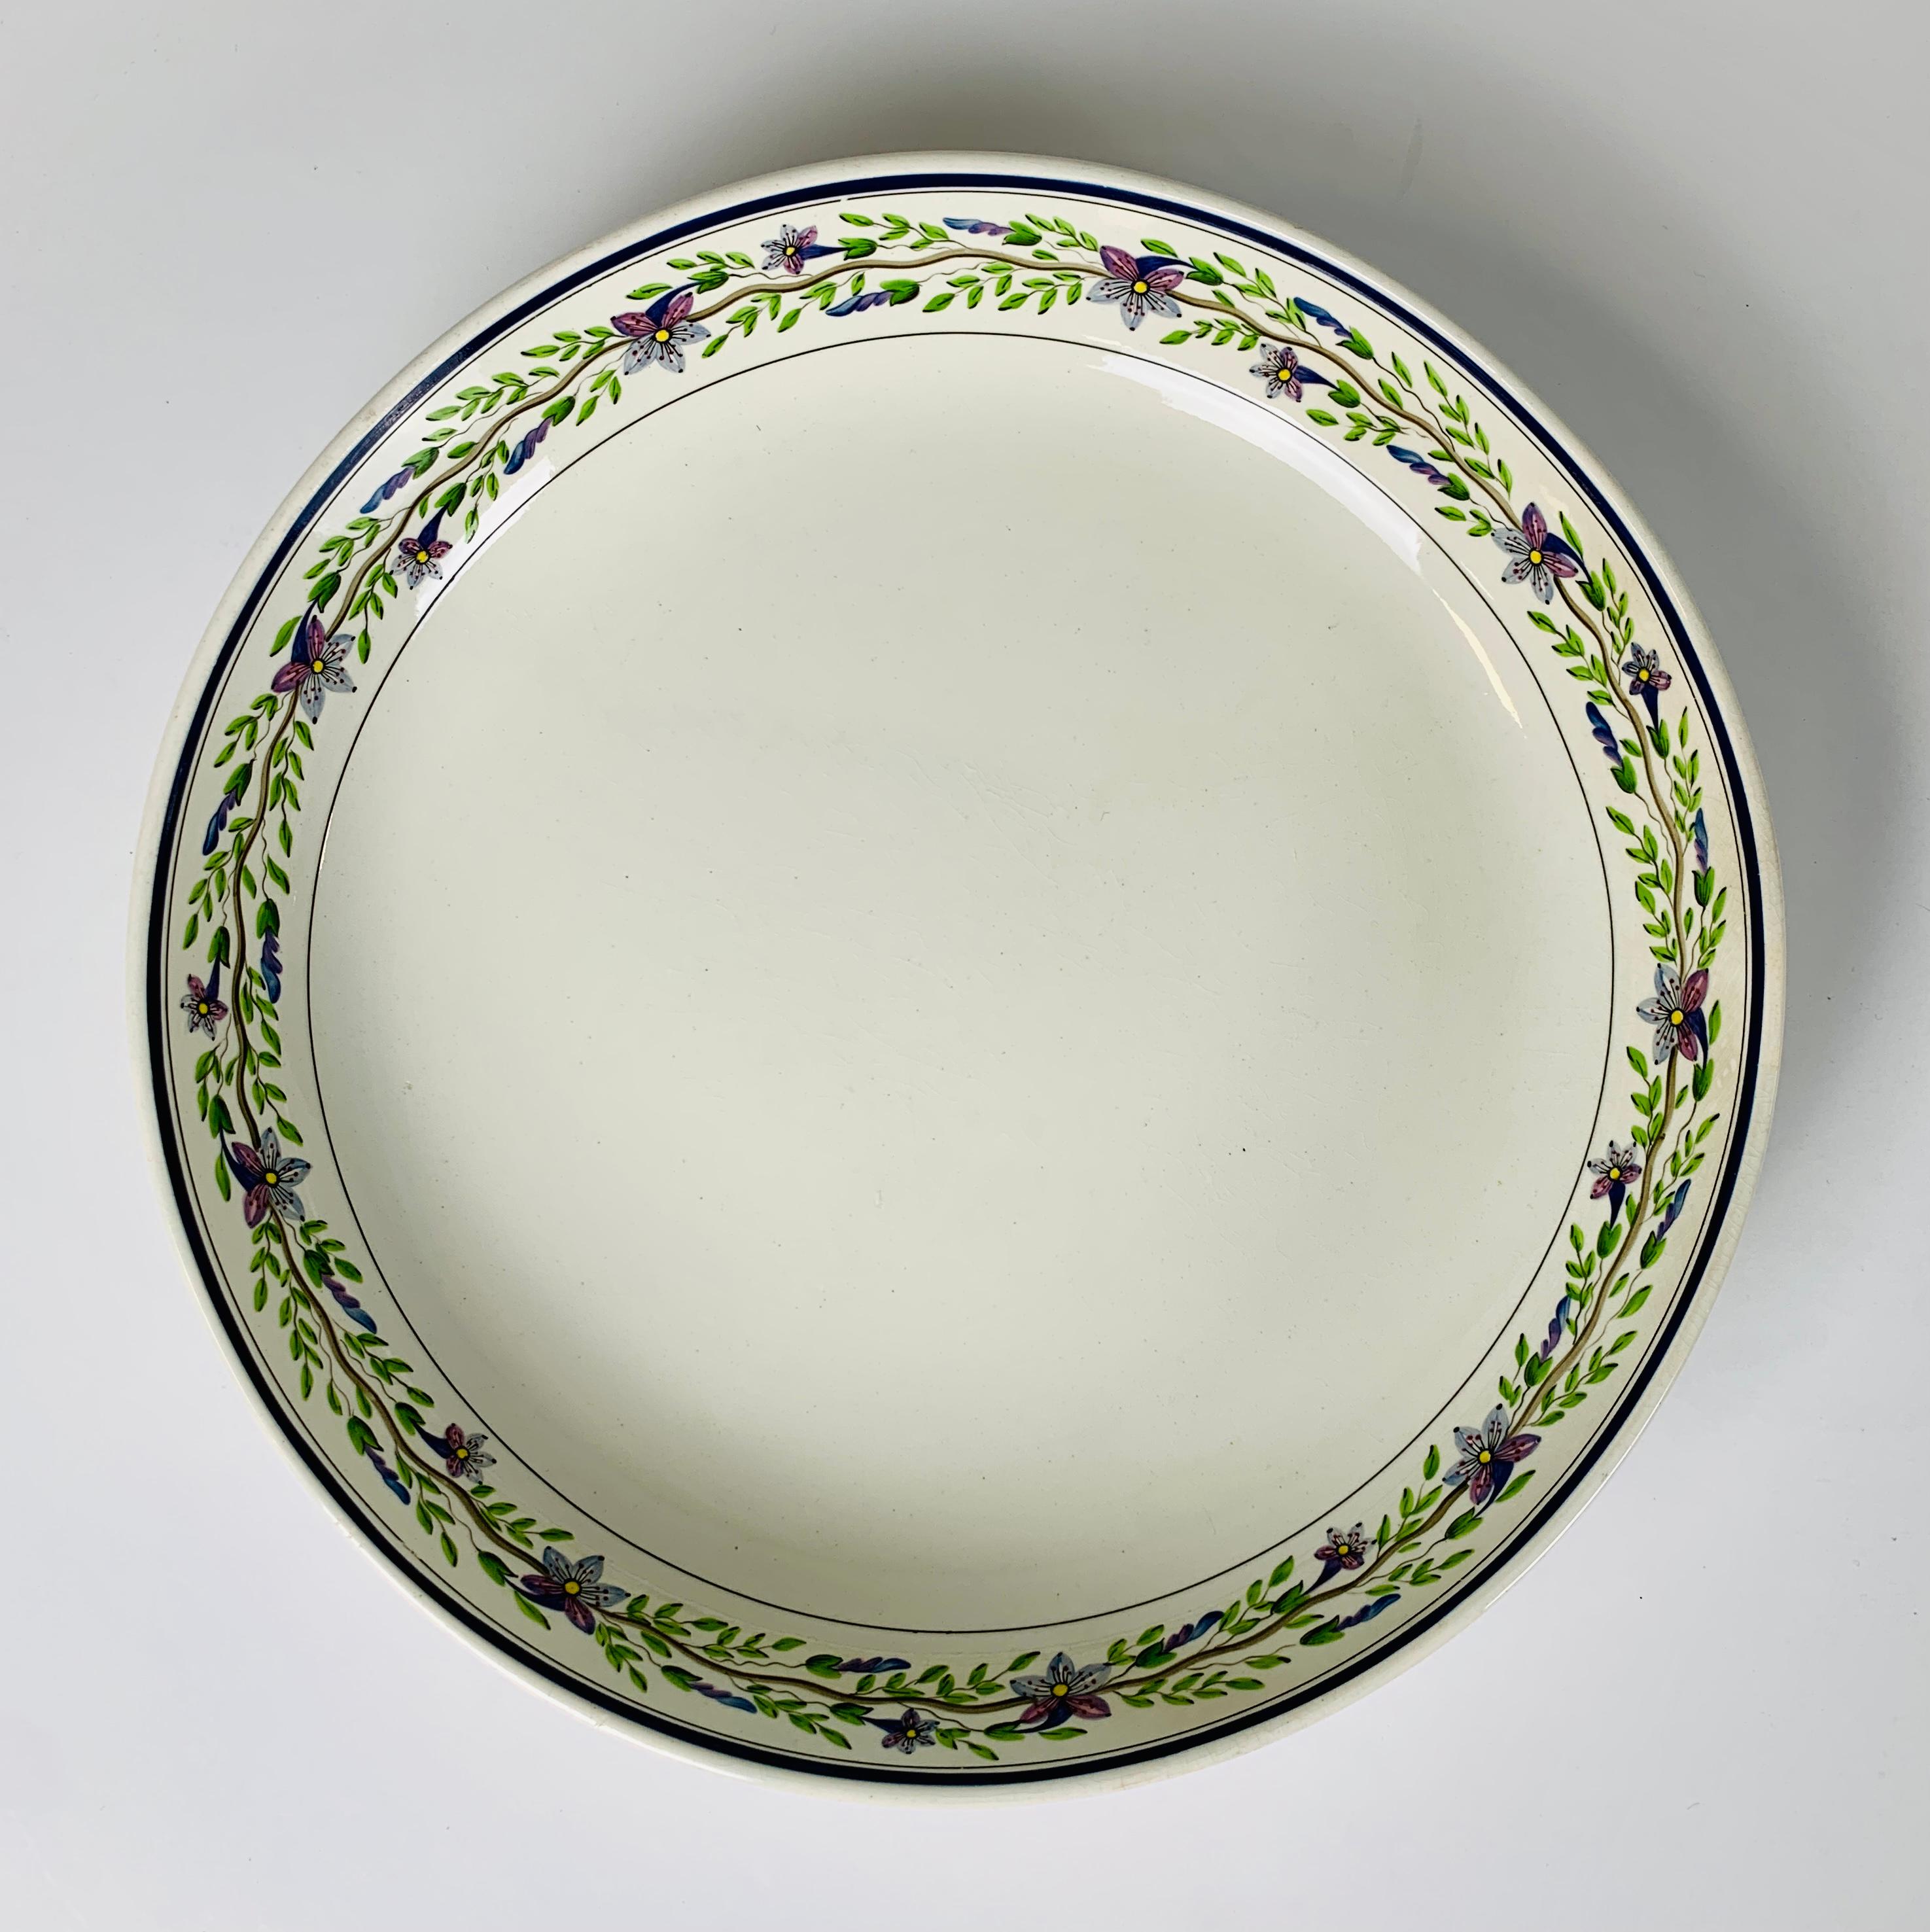 A pair of large Wedgwood bowls their borders painted with a lovely, delicate vine with lavender and lavender-pink flowers and green leaves. 
They are understated and beautiful!
The underside of each bowl is marked with an impressed 